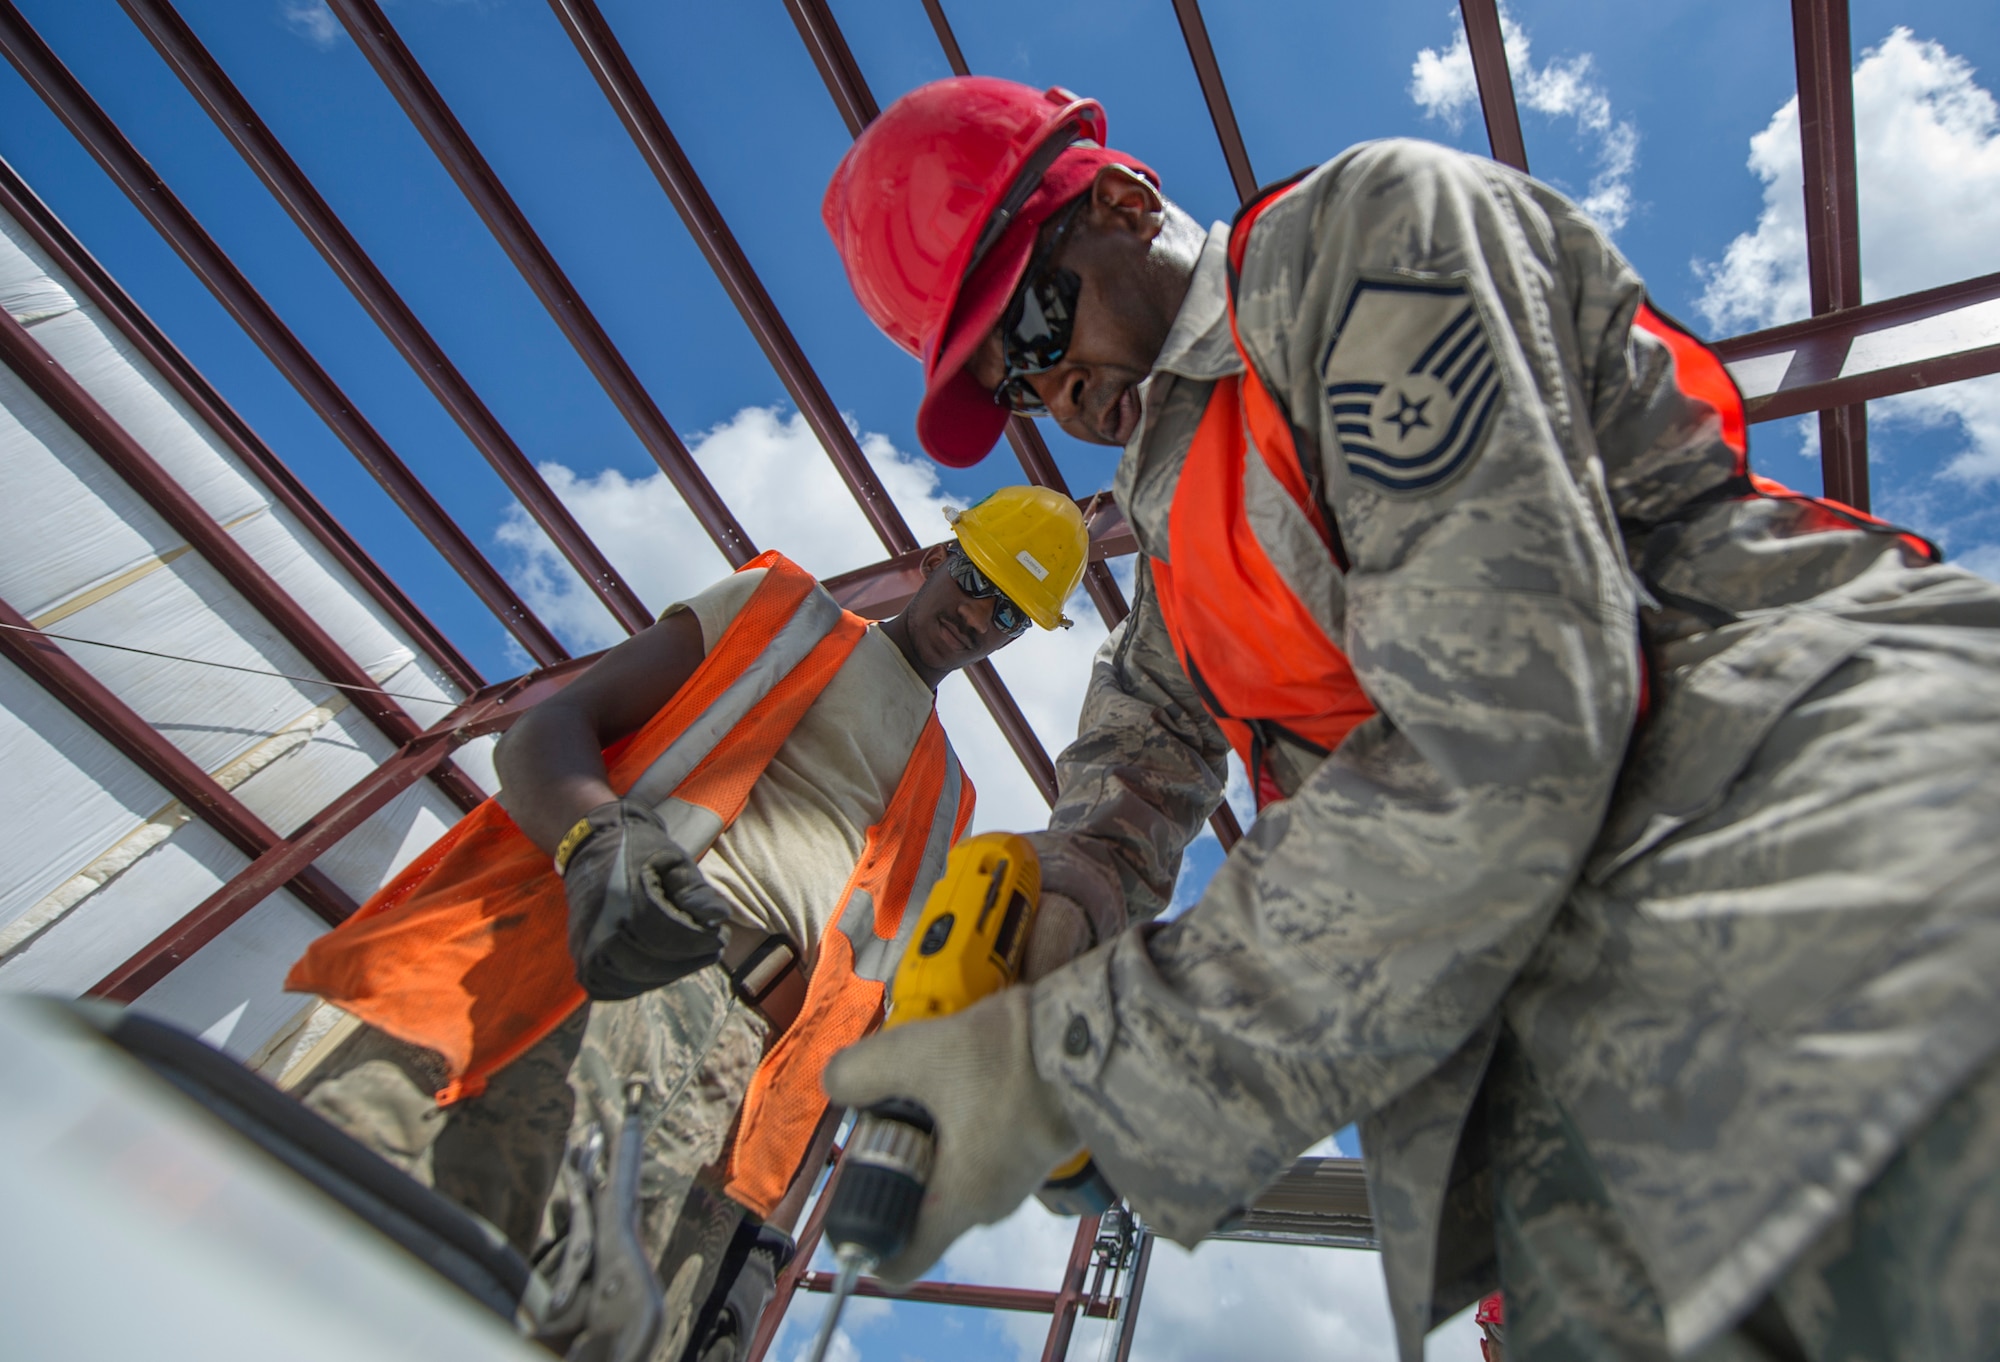 (From left) Senior Airman Darrien Anderson and Master Sgt. David Robinson, both 560th RED HORSE Squadron Reservists at Joint Base Charleston, South Carolina, assemble one of two rolling door covers during a construction project at Joint Base Charleston.  Members of the 560th RHS, 628th Civil Engineer Squadron at Joint Base Charleston, 556th RHS, 555th RHS from Nellis Air Force Base, Nevada, and 567th RHS from Seymour Johnson Air Force Base, North Carolina joined forces June, July and August at Joint Base Charleston to build a 4,800 square-foot preengineered  building building to store 560th RHS construction equipment and gear.  Rapid Engineer Deployable, Heavy Operational Repair Squadron, Engineer (RED HORSE) squadrons provide the Air Force with a highly mobile civil engineering capability in support of contingency and special operations worldwide. They are self-sufficient, mobile squadrons that provide heavy construction support such as runway/facility construction, electrical upgrades, and equipment transport when requirements exceed normal base civil engineer capabilities and where Army engineer support is not readily available. (U.S. Air Force Photo by Michael Dukes)